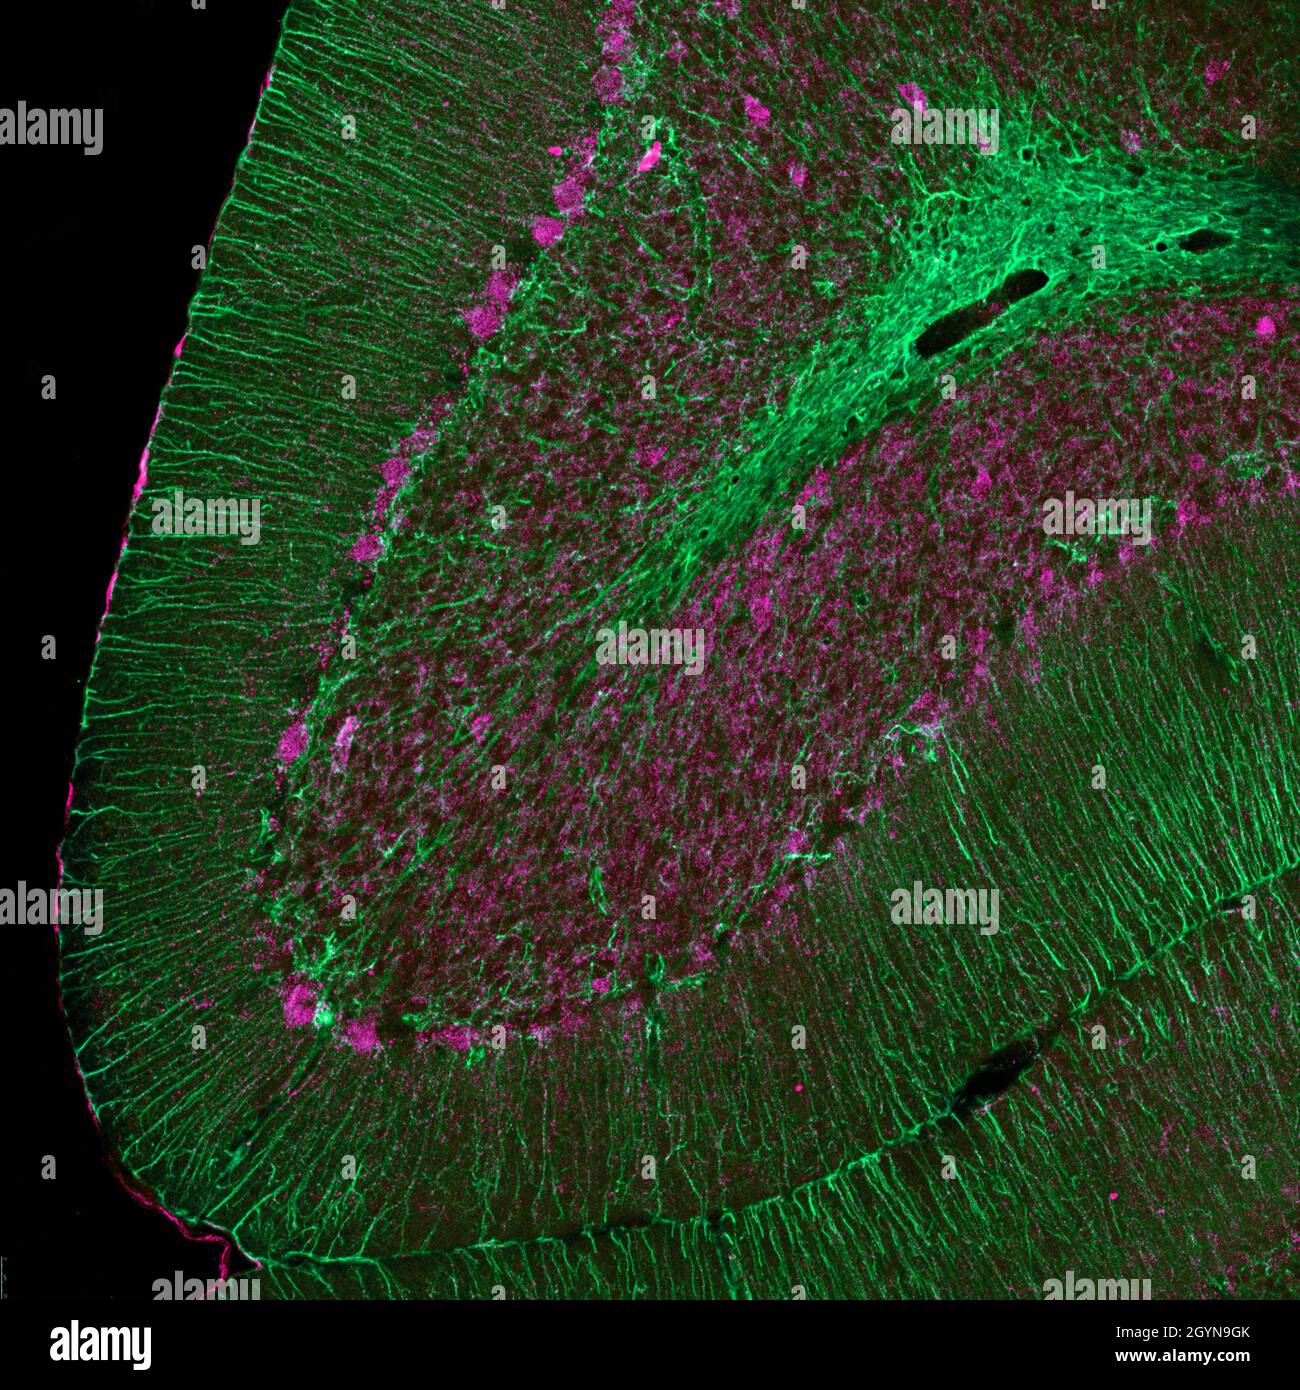 Sagittal section of mouse cerebellum labelled with immunofluorescence and visualized with confocal laser scanning microscopy. Large Purkinje cells and Stock Photo